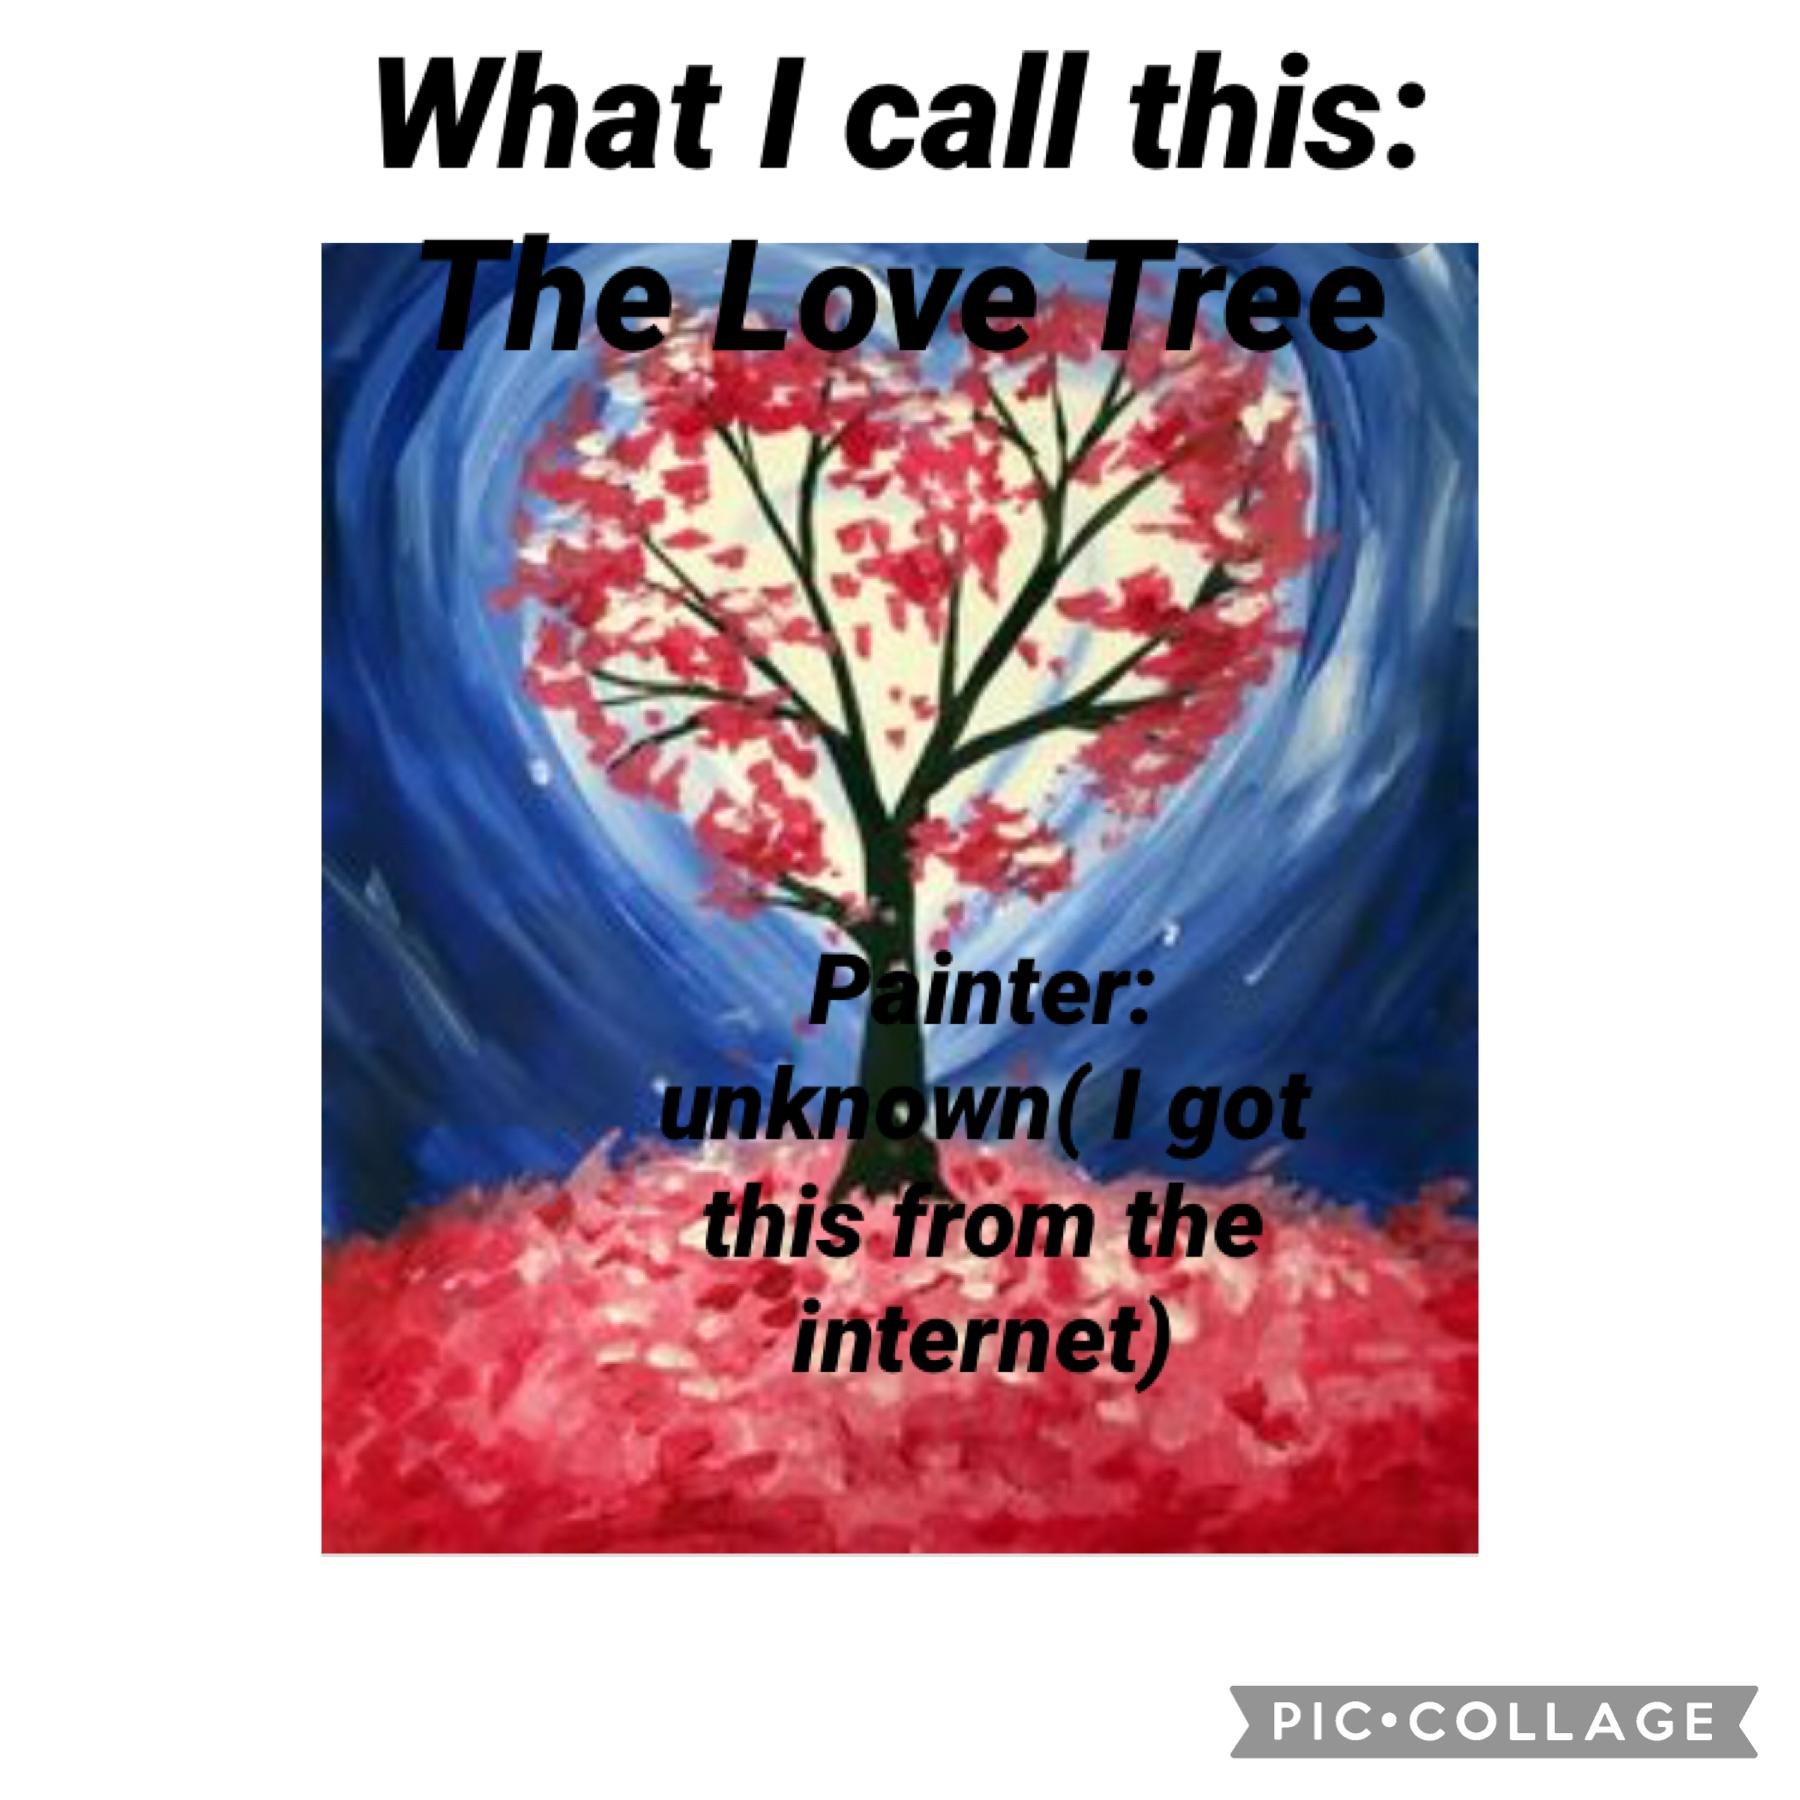 Art Critic #1( ❤️Tap❤️)

I would give this one a 8( 10 being the best) because it shows nature, and love at the same time. We need to be loving as we need to help nature. As humans, it’s our job to help our world stay healthy. And loving nature is perfect